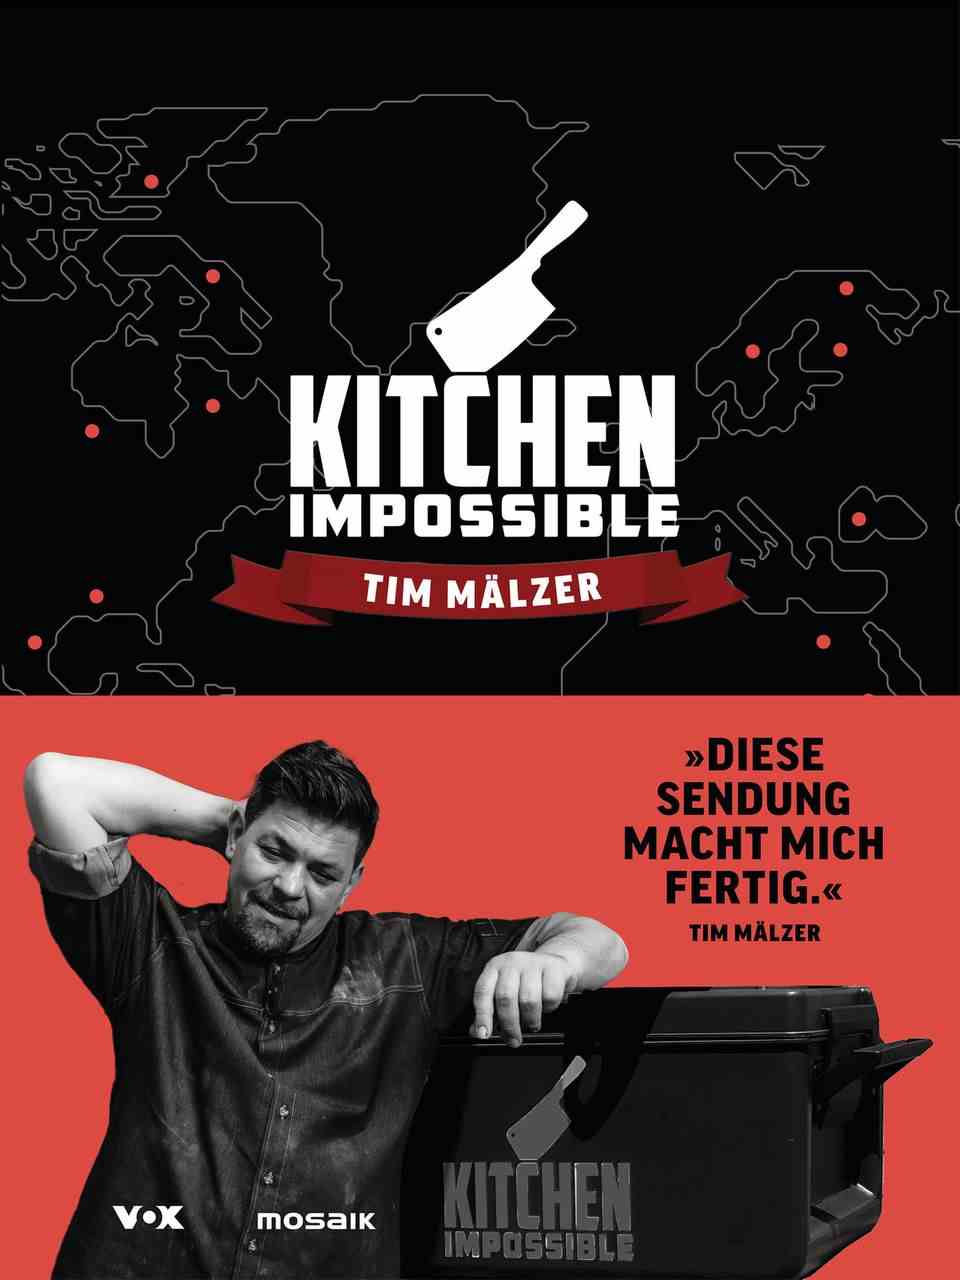 More recipes in "Kitchen Impossible" by Tim Malzer.  Mosaic Publisher.  176 pages.  24 euros.